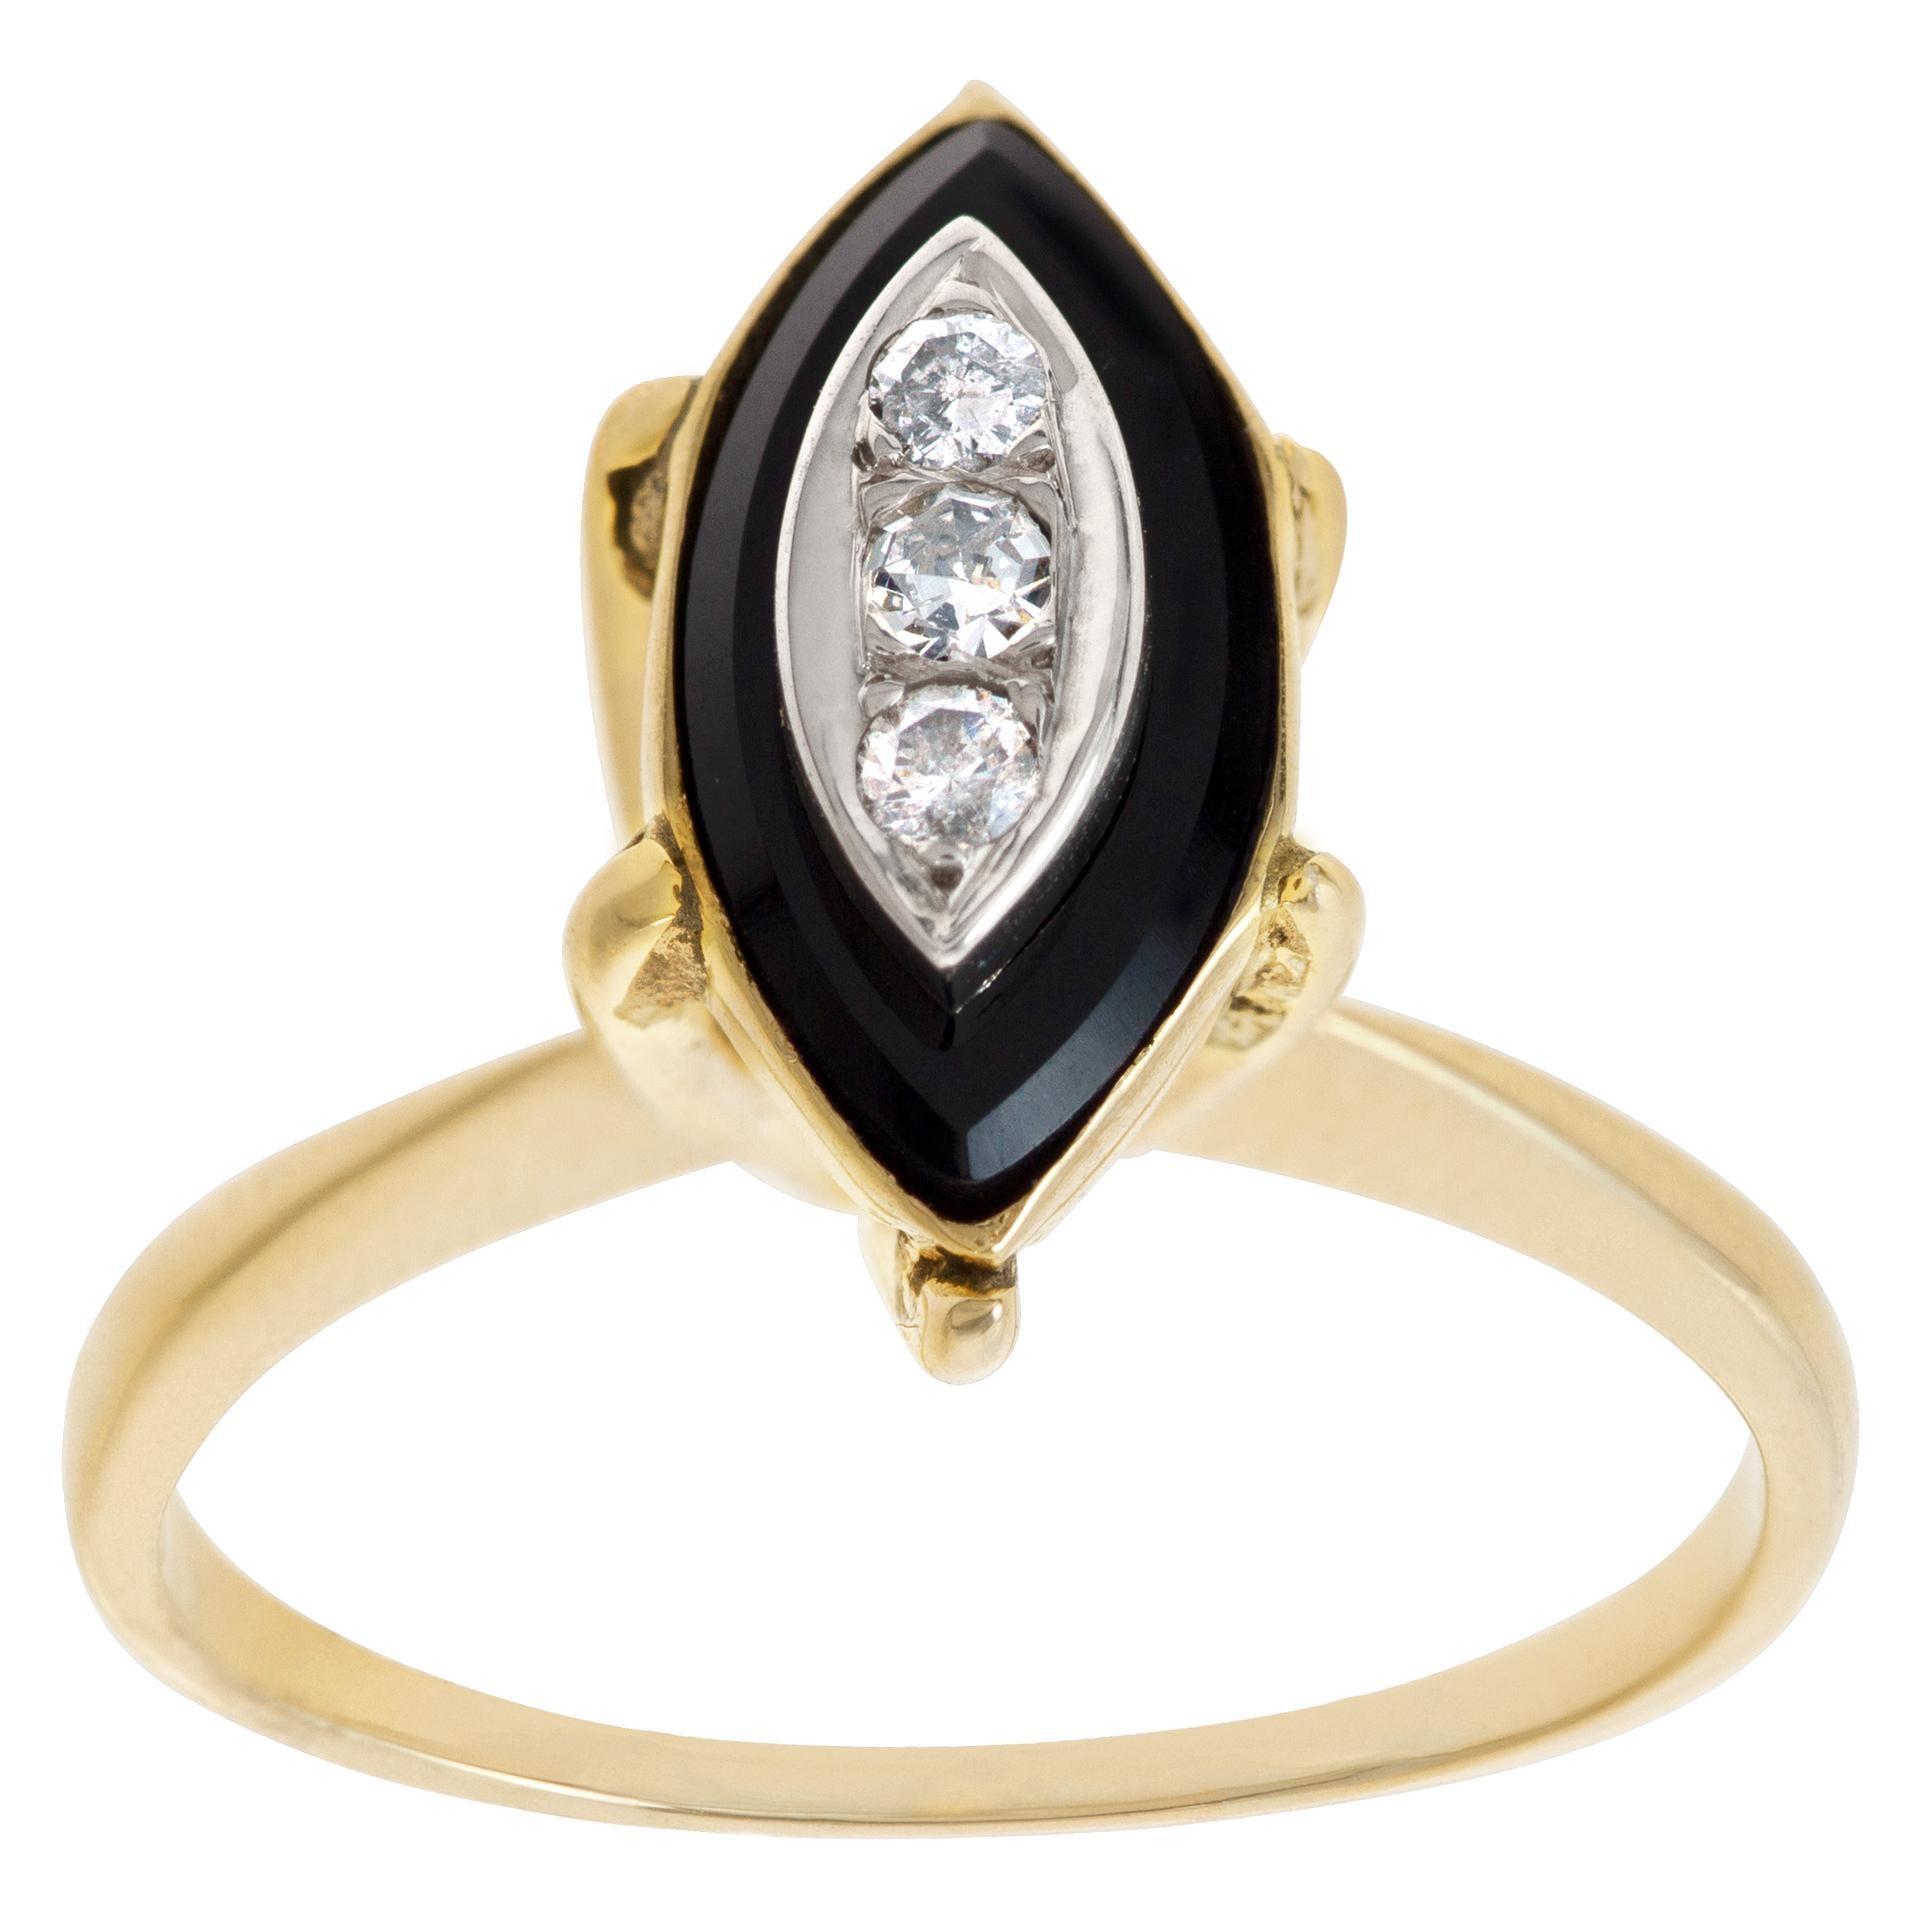 Diamond and Onyx Ring in 14k Yellow Gold